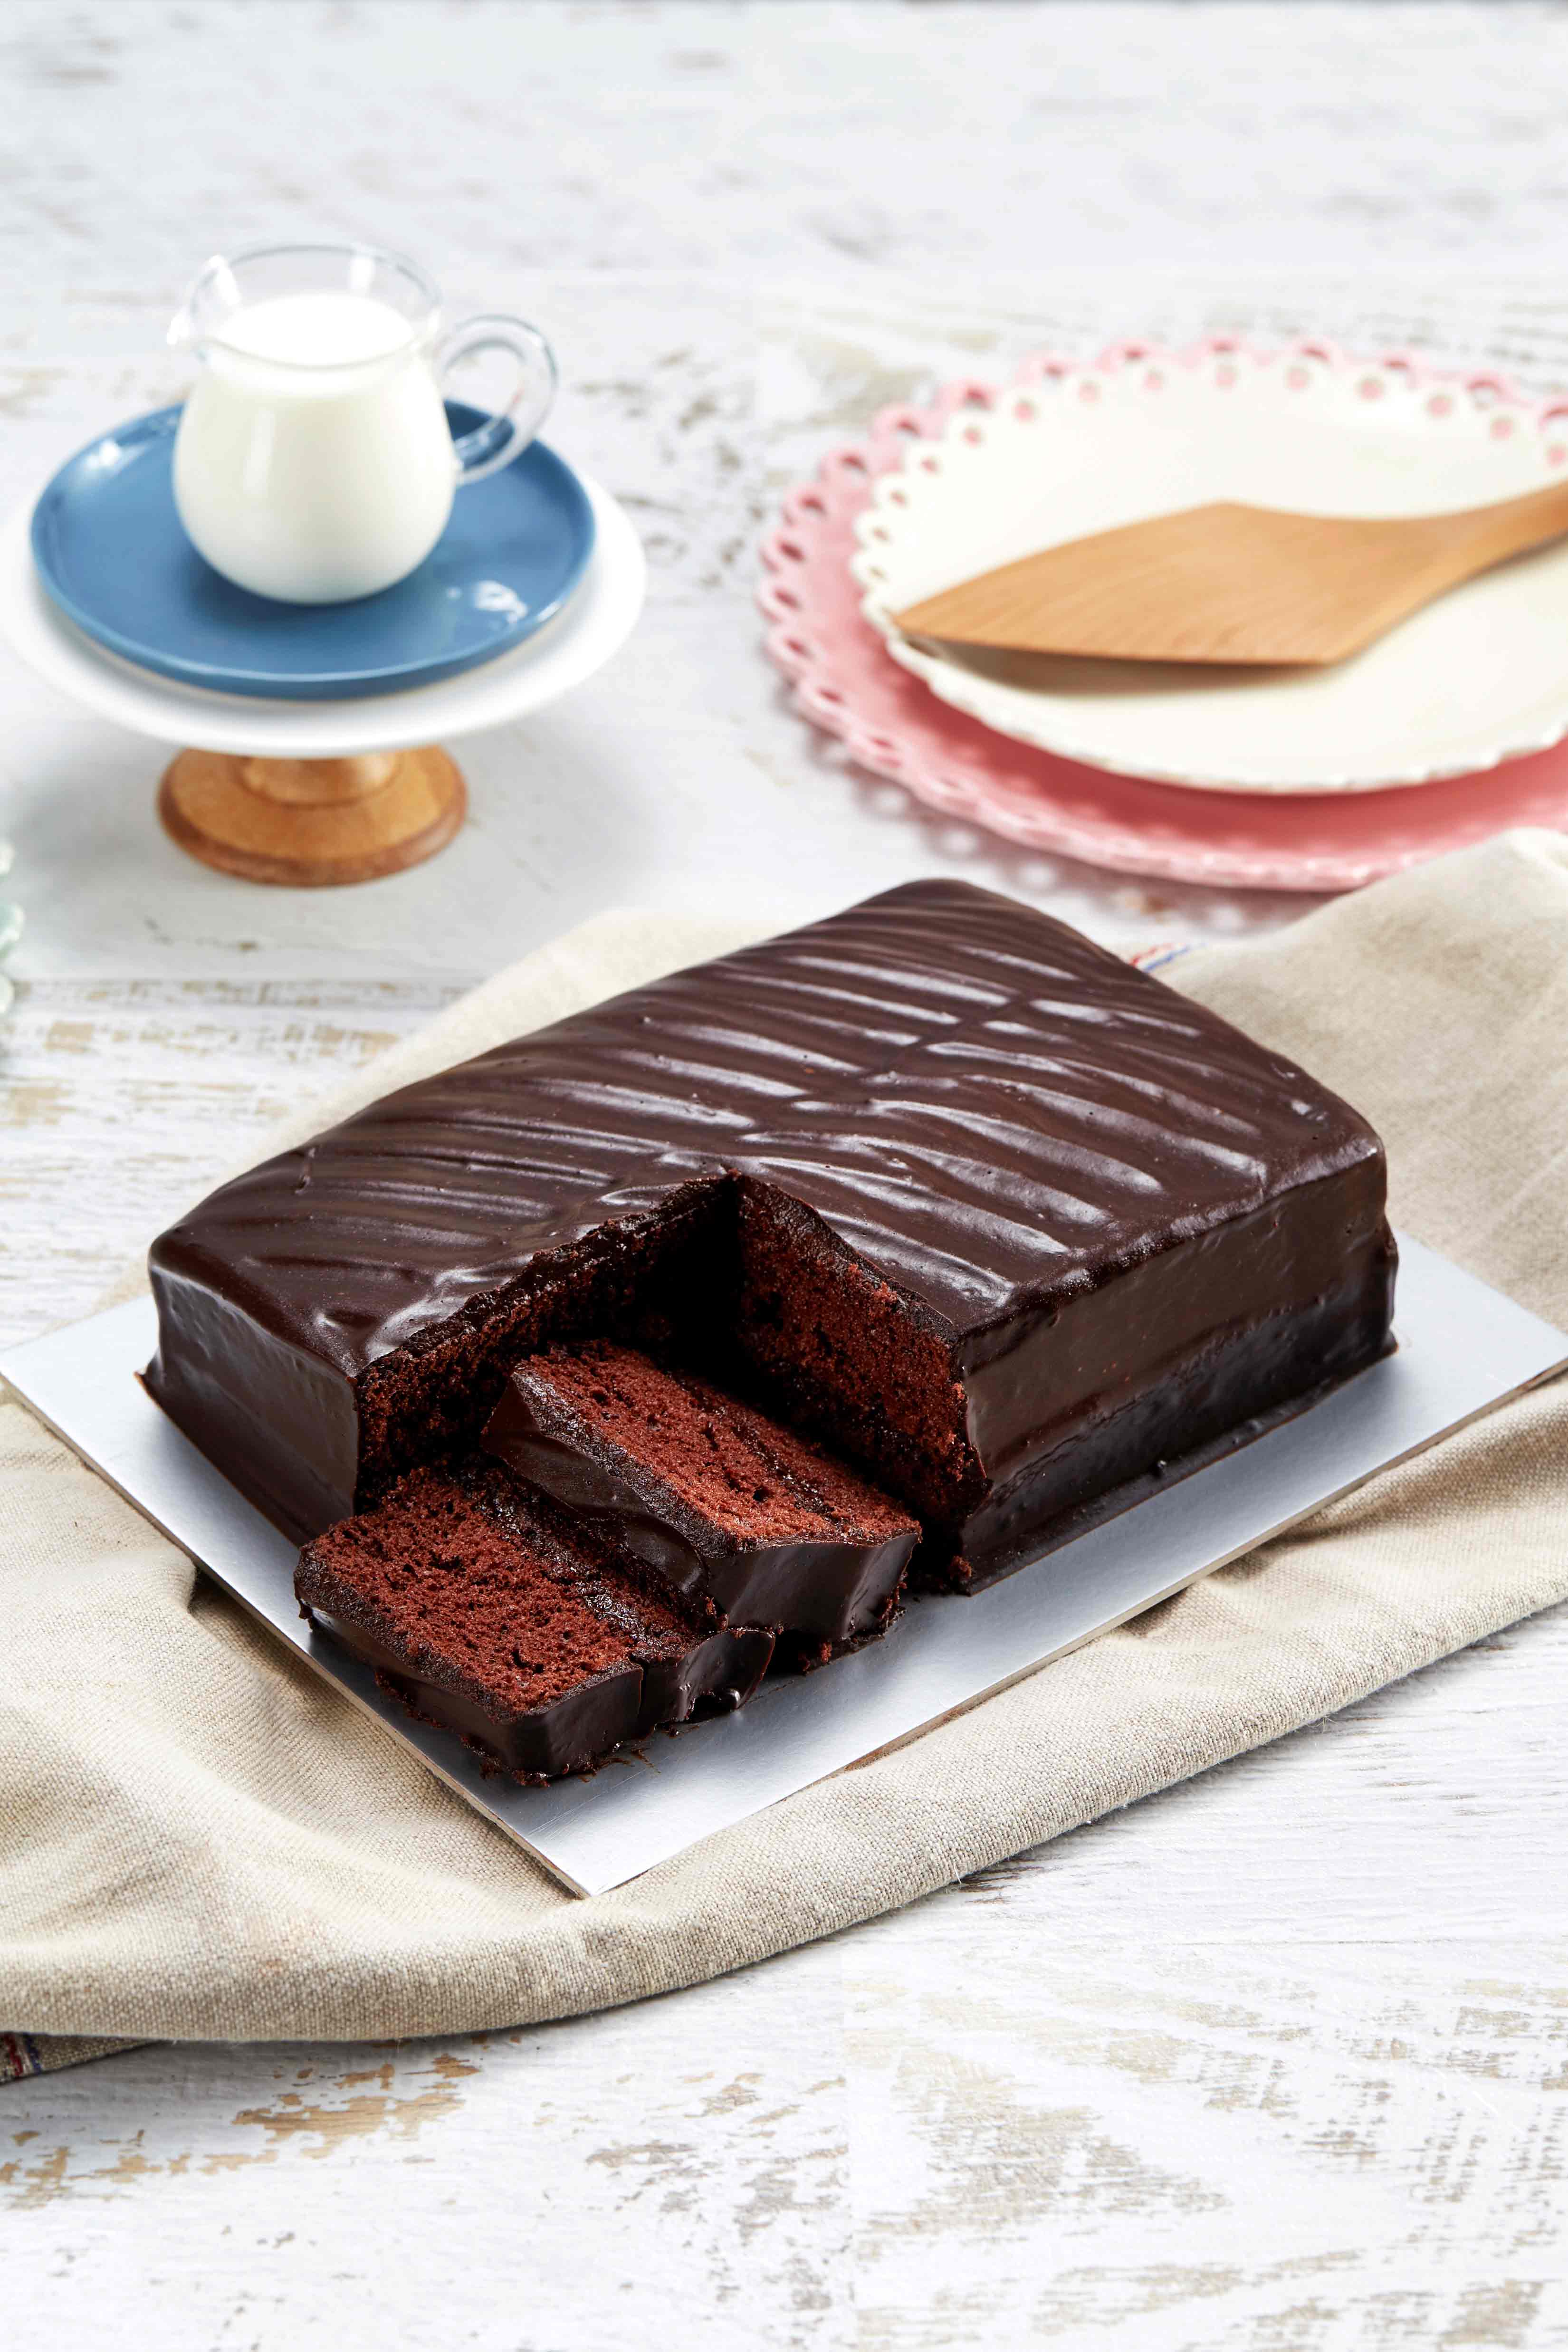 10 Lana-Style Chocolate Fudge Cakes, Ranked From Worst To Best - 8days